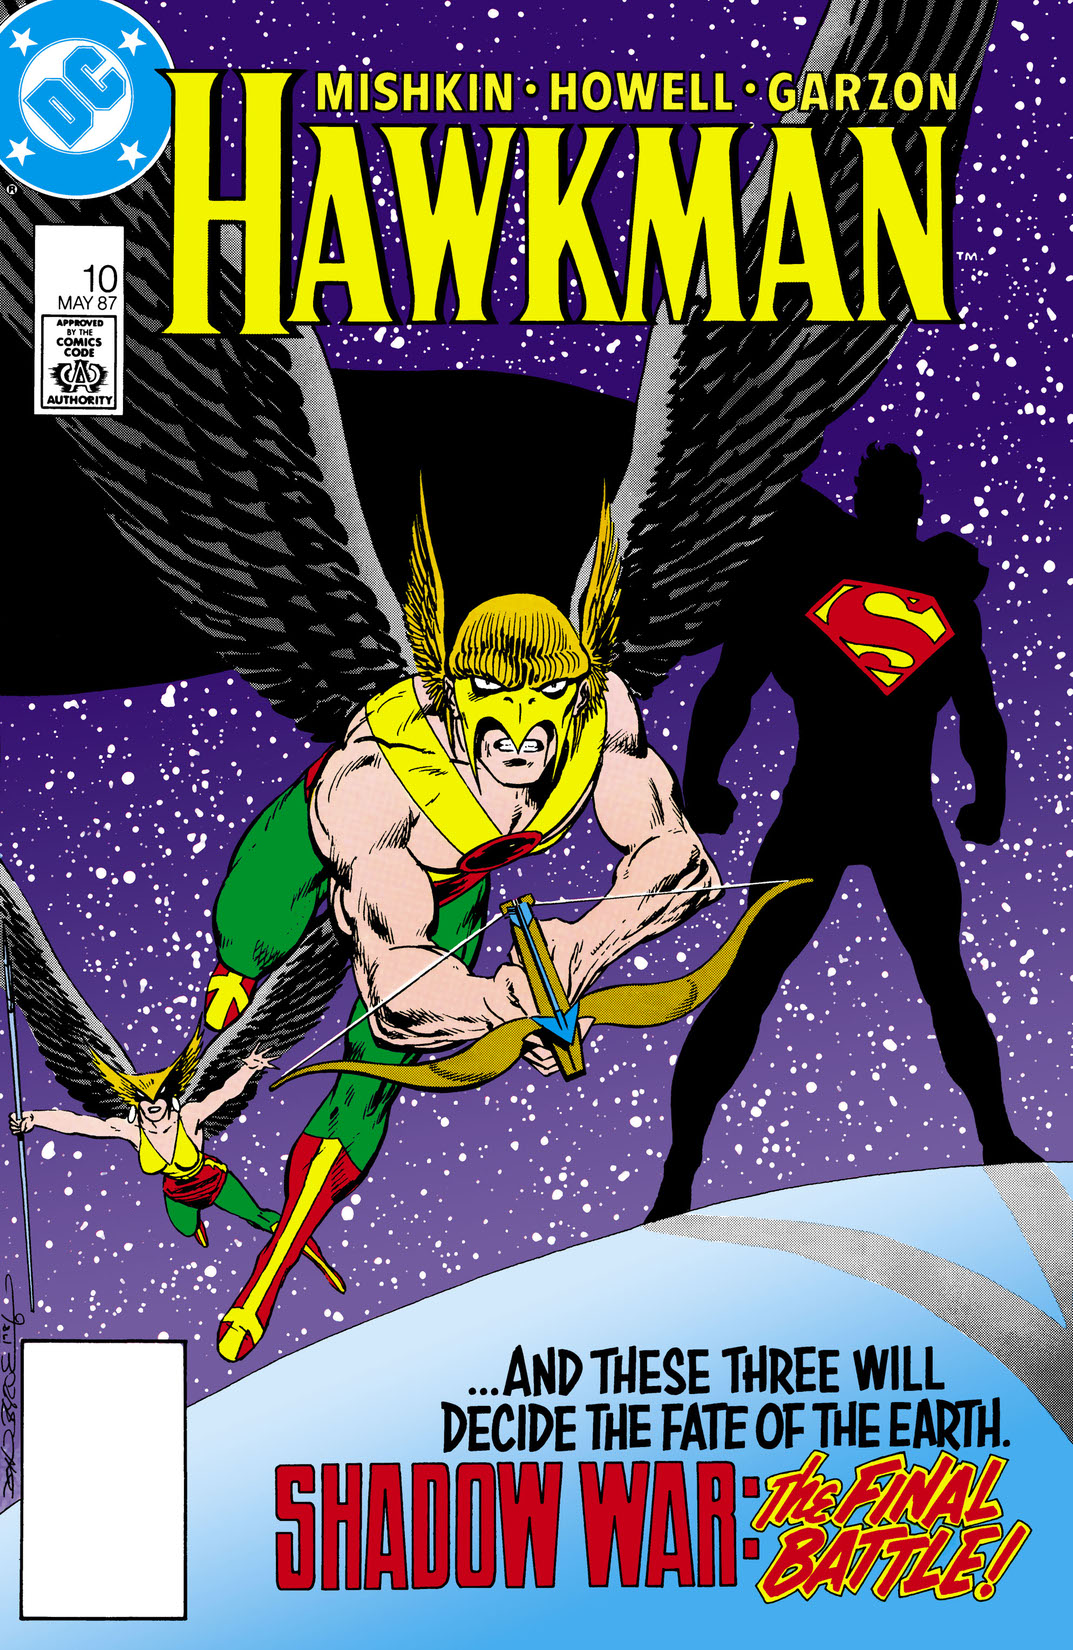 Hawkman (1986-) #10 preview images